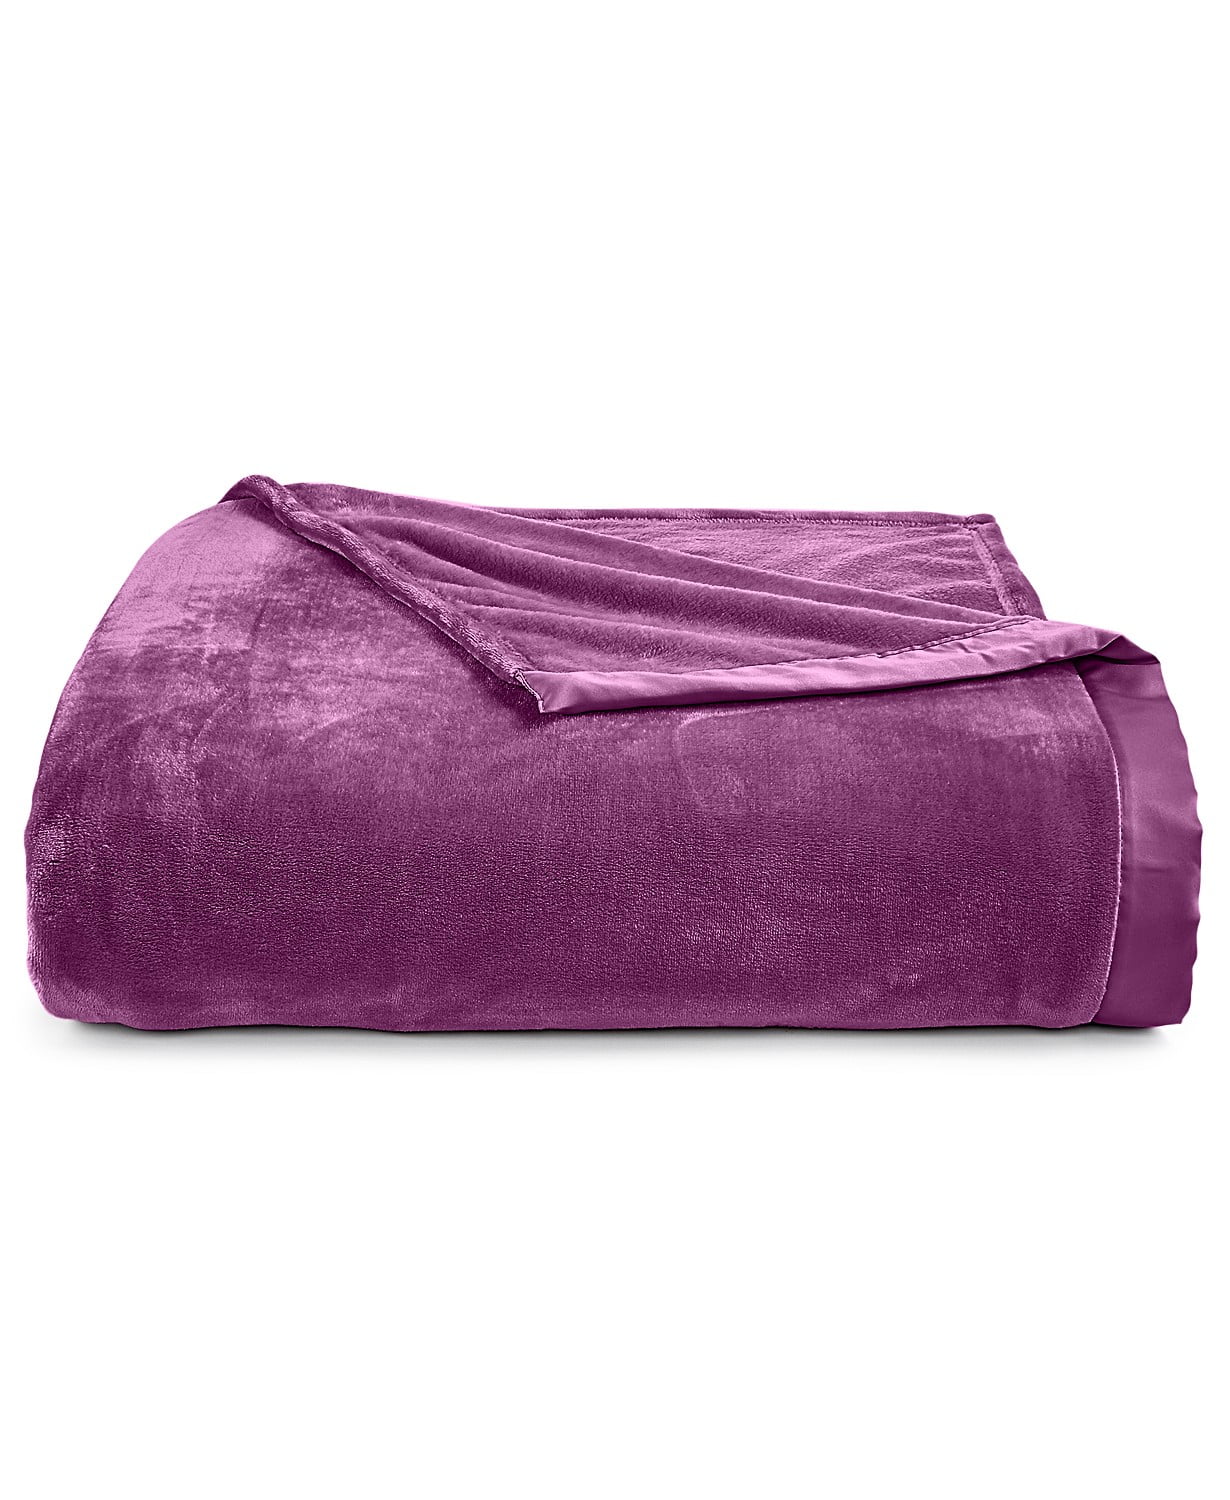 Photo 1 of Full / Queen Berkshire Classic Velvety Plush Eggplant Blanket, With Super-Soft Faux Fleece and Velvety Sheen, Full or Queen, Purple